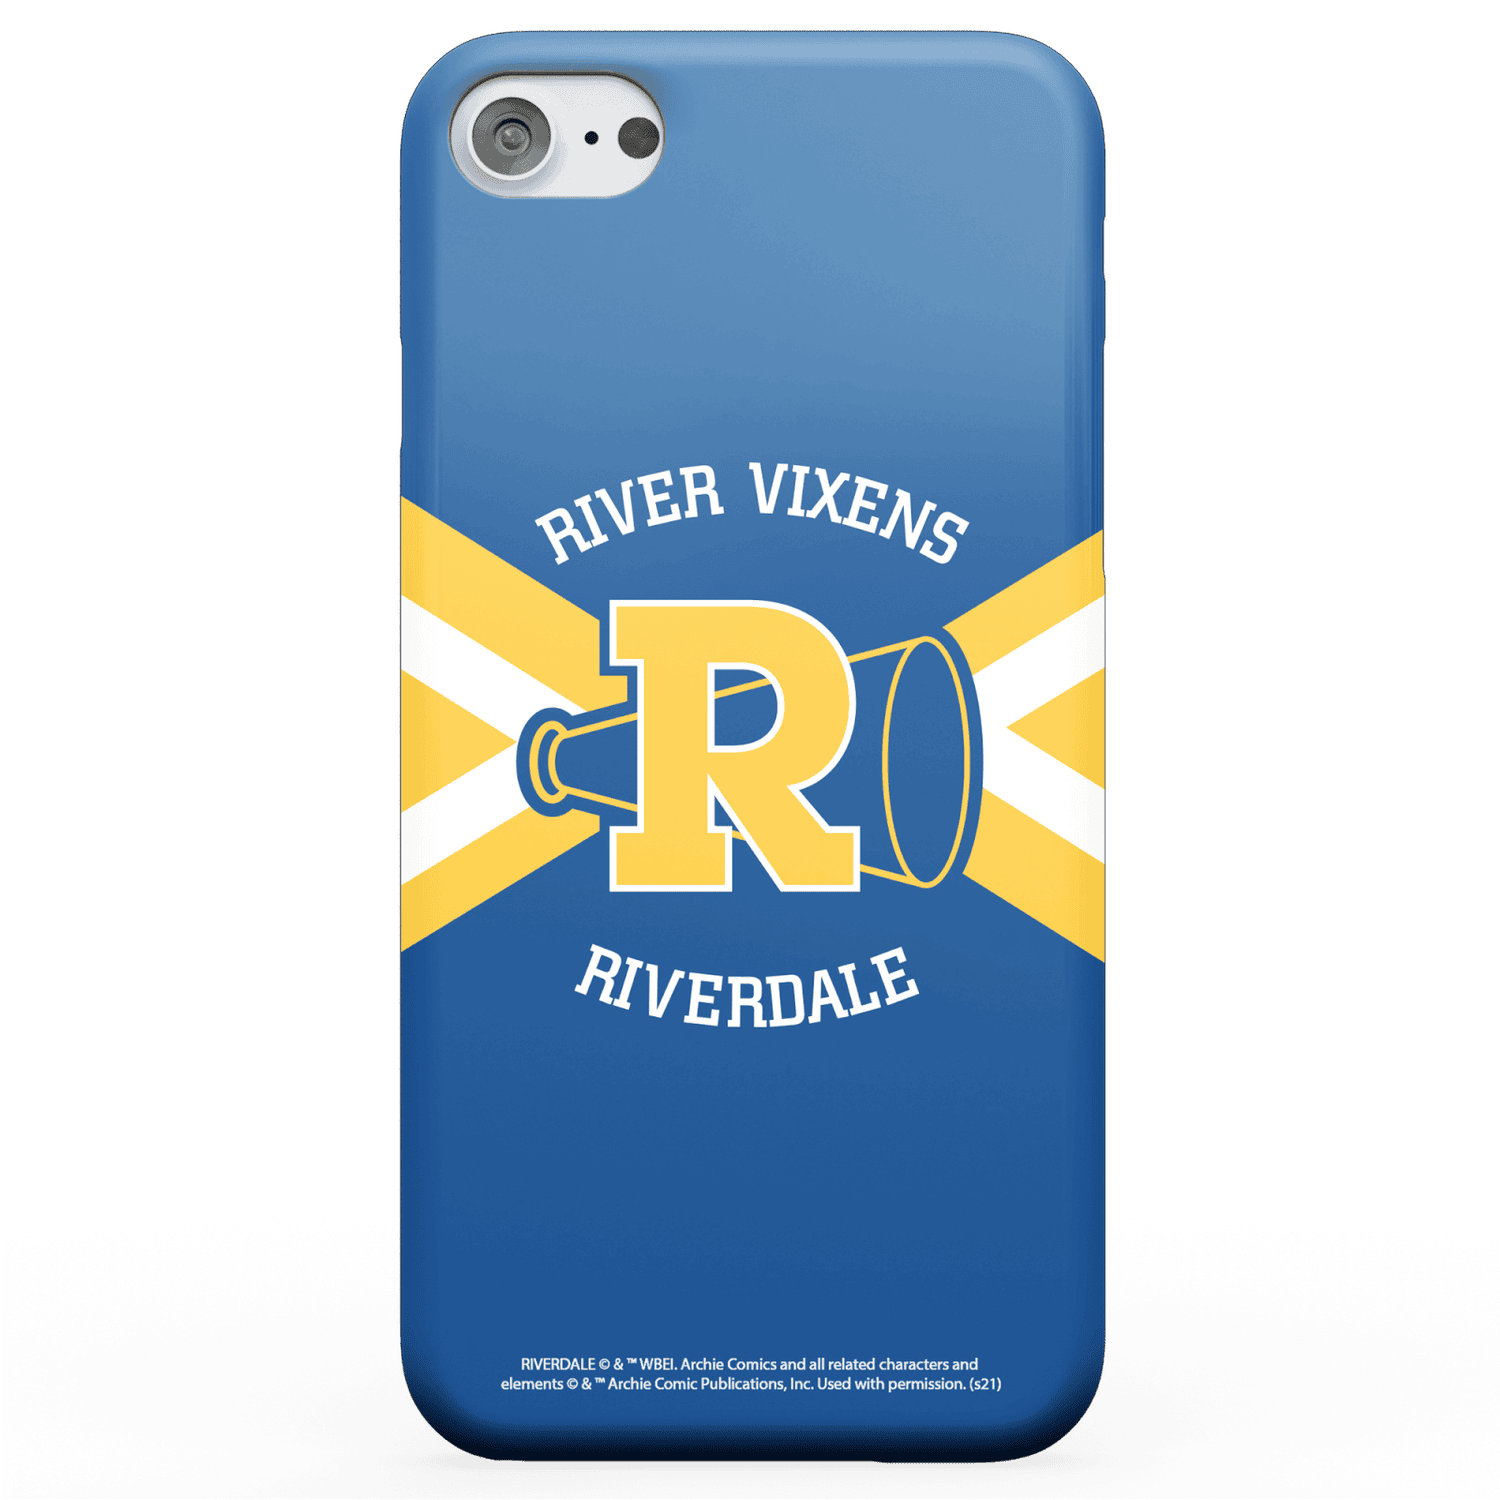 Riverdale River Vixens Phonecase for iPhone and Android